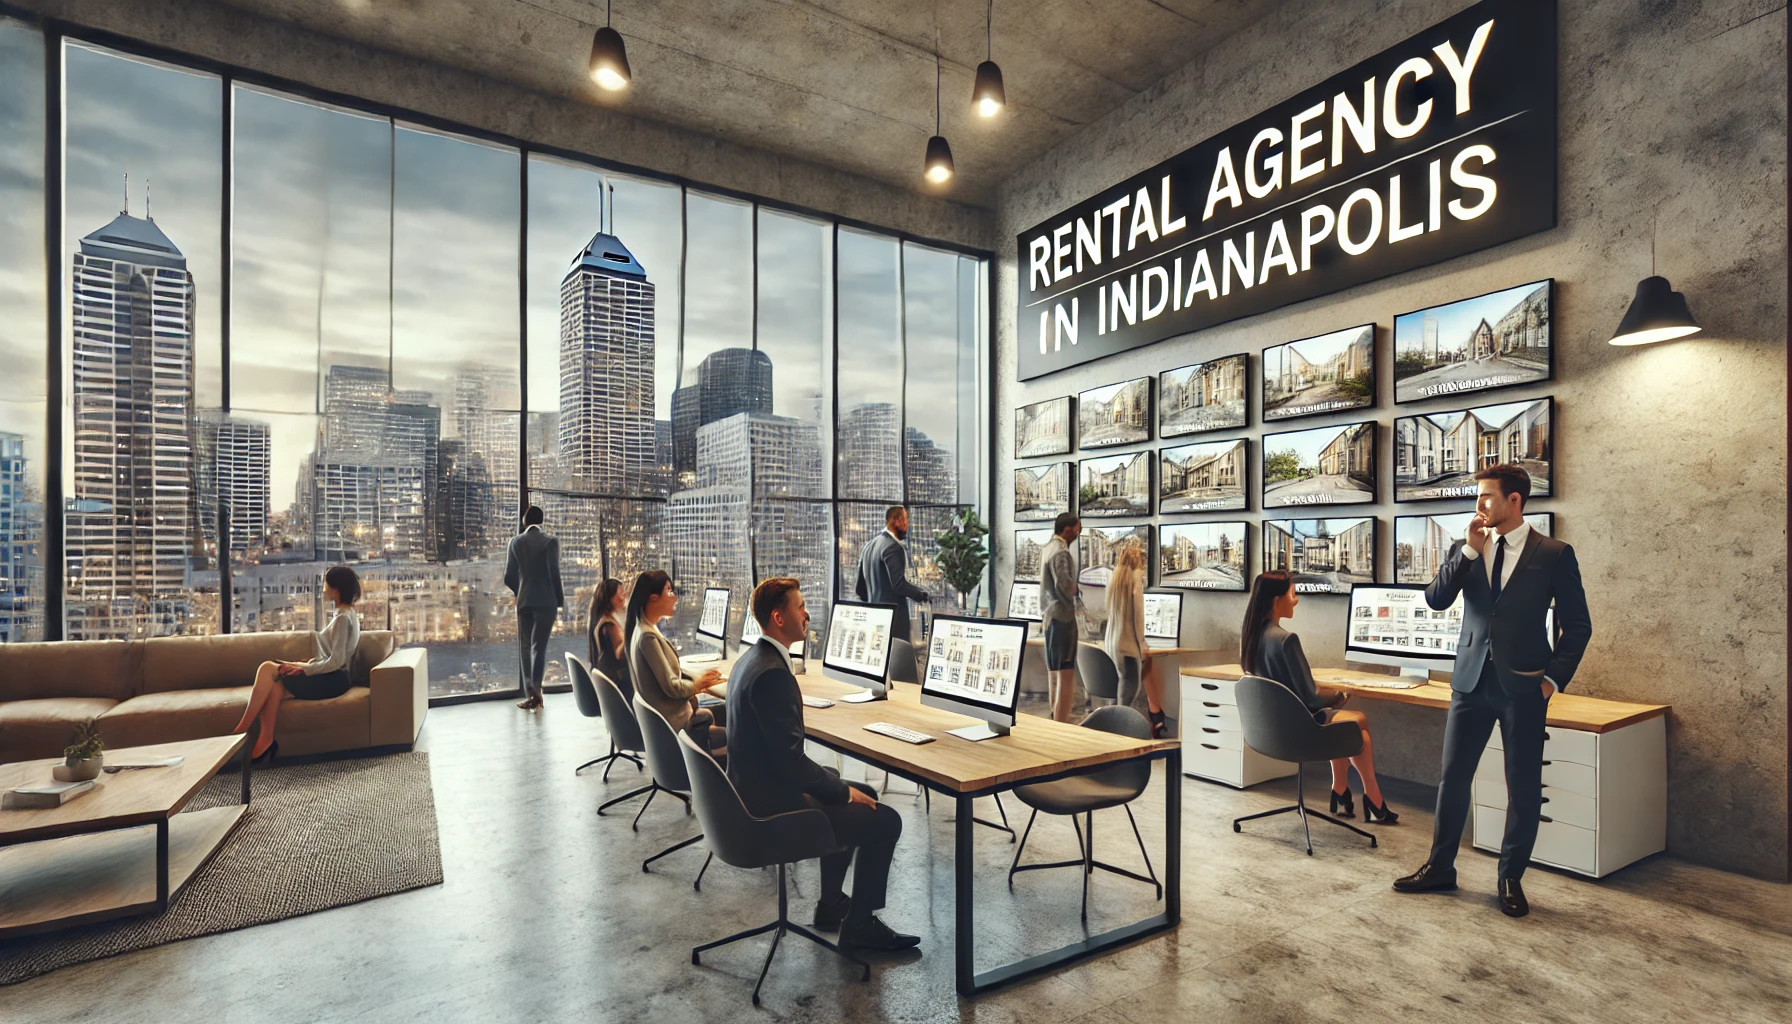 The Ultimate Guide to House Rental Companies in Indianapolis